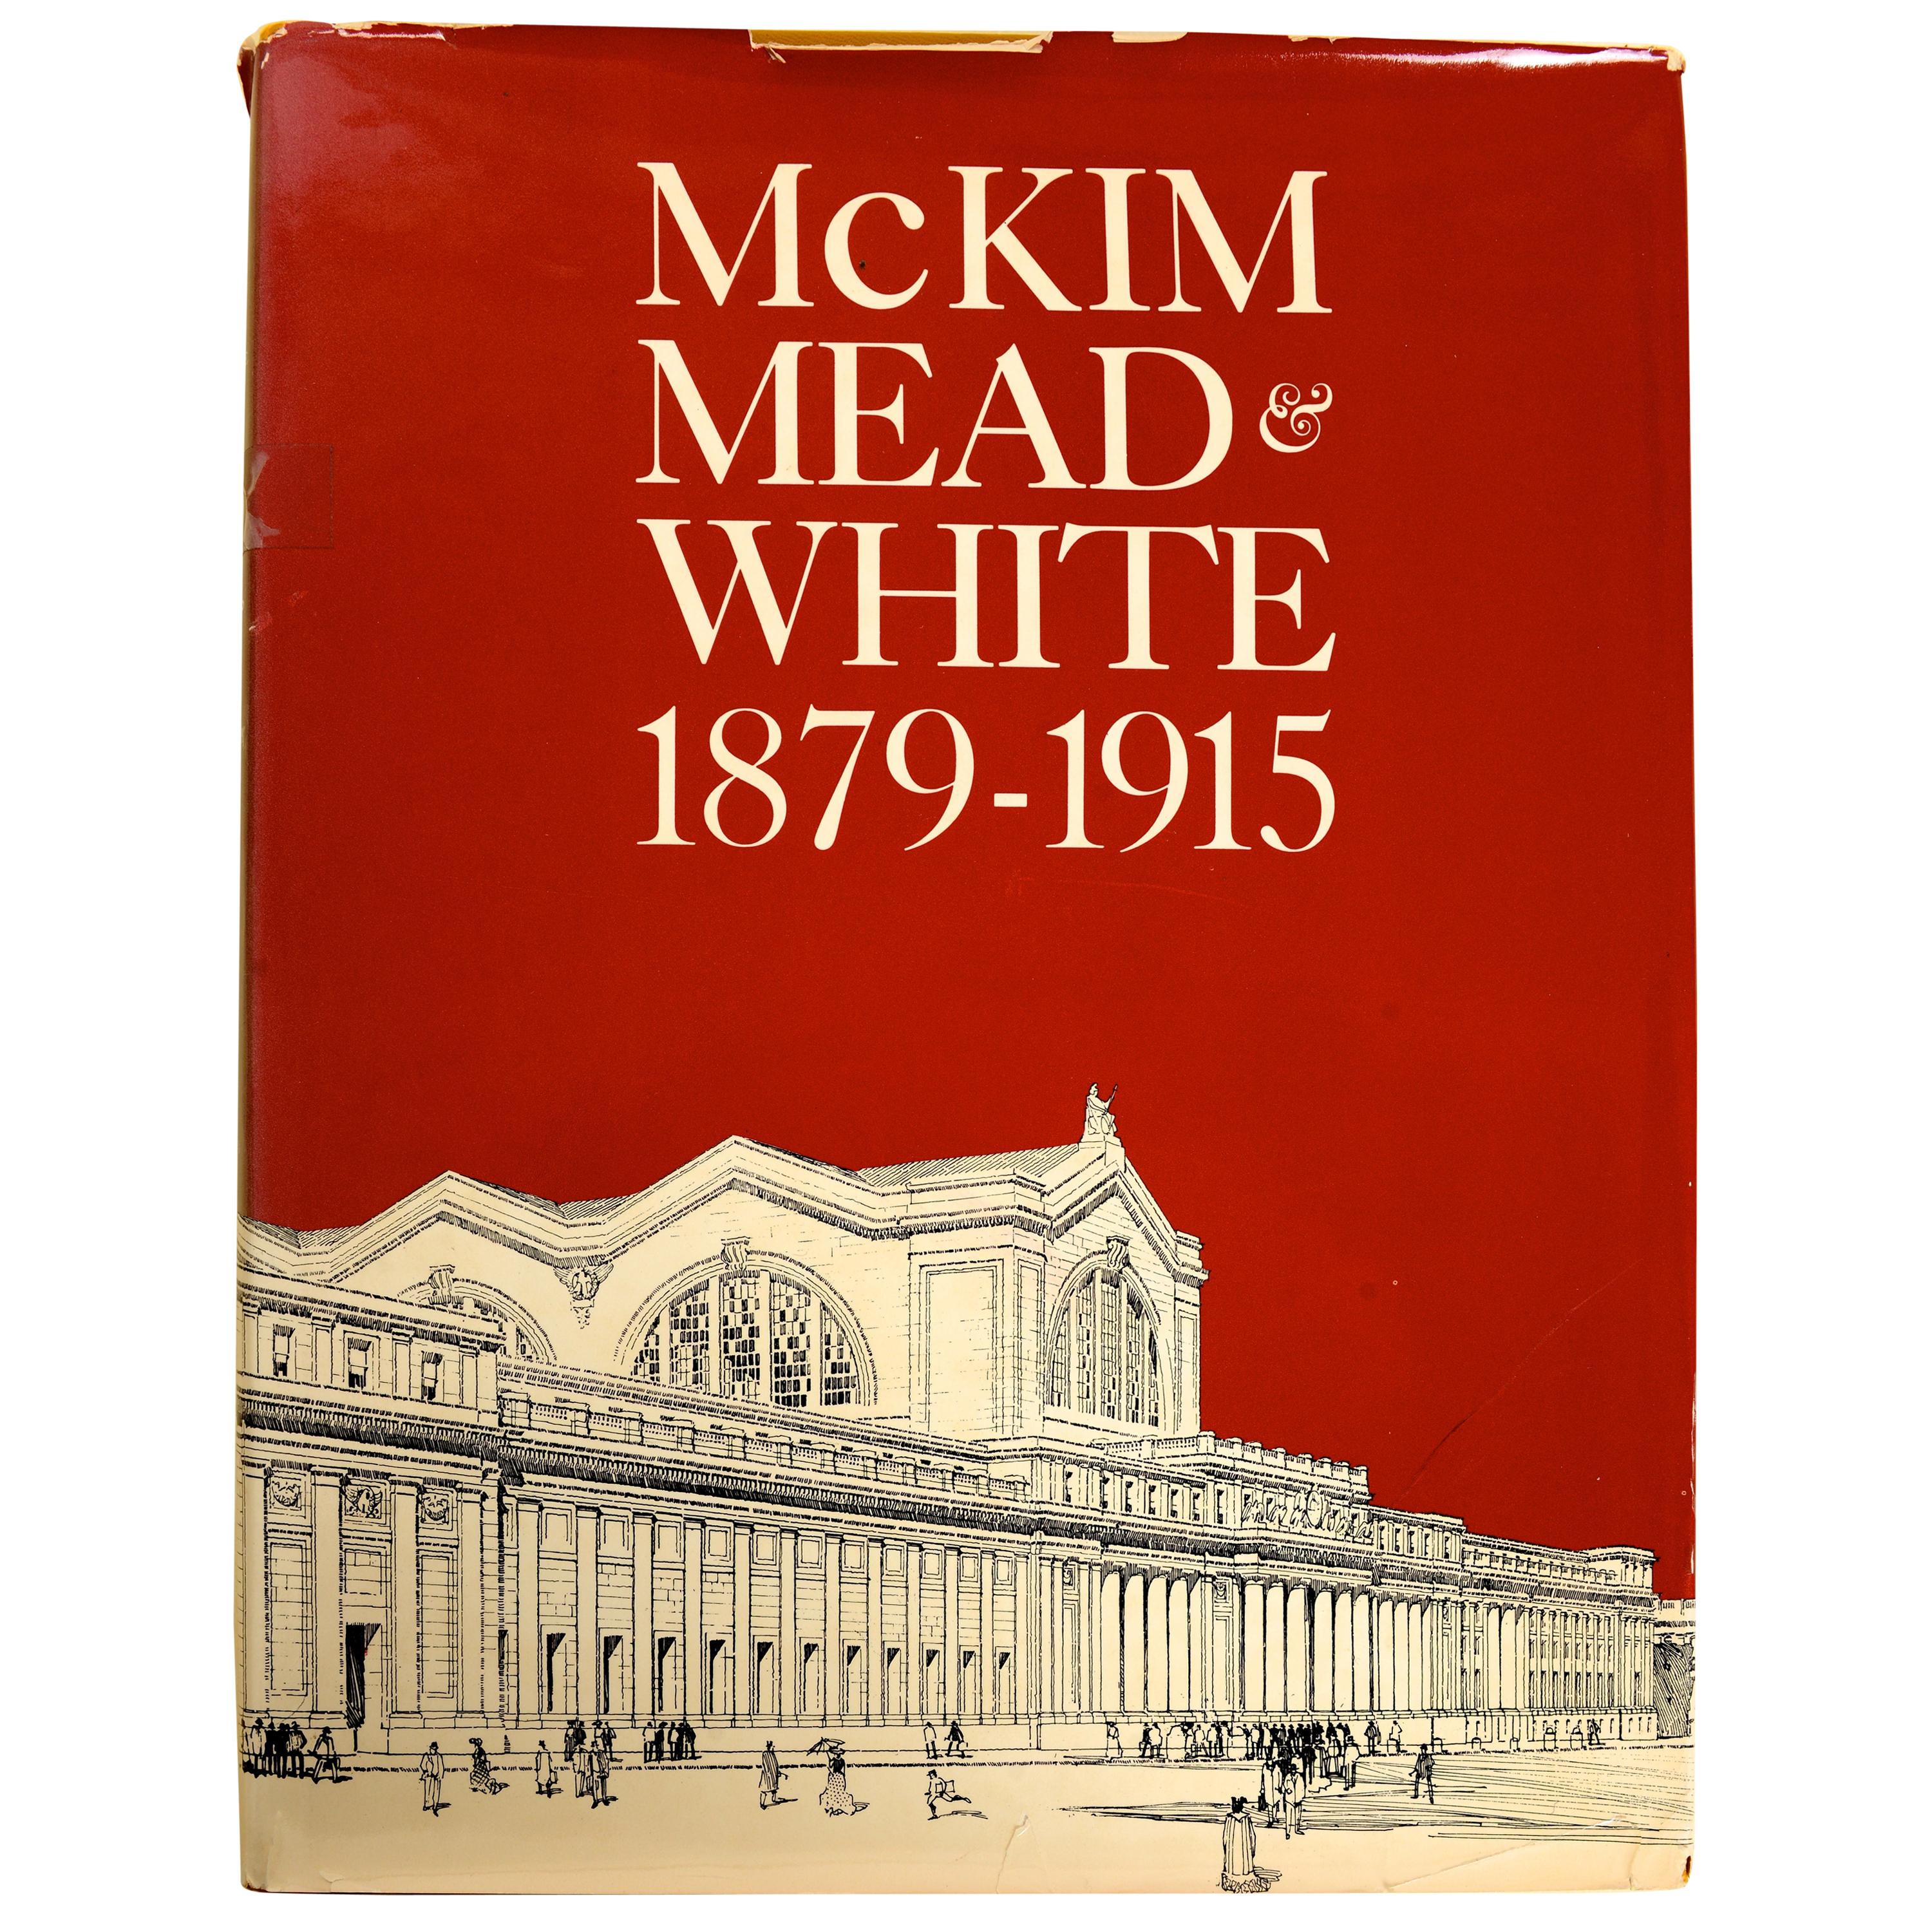 A Monograph of the Work of McKim, Mead and White, 1879-1915